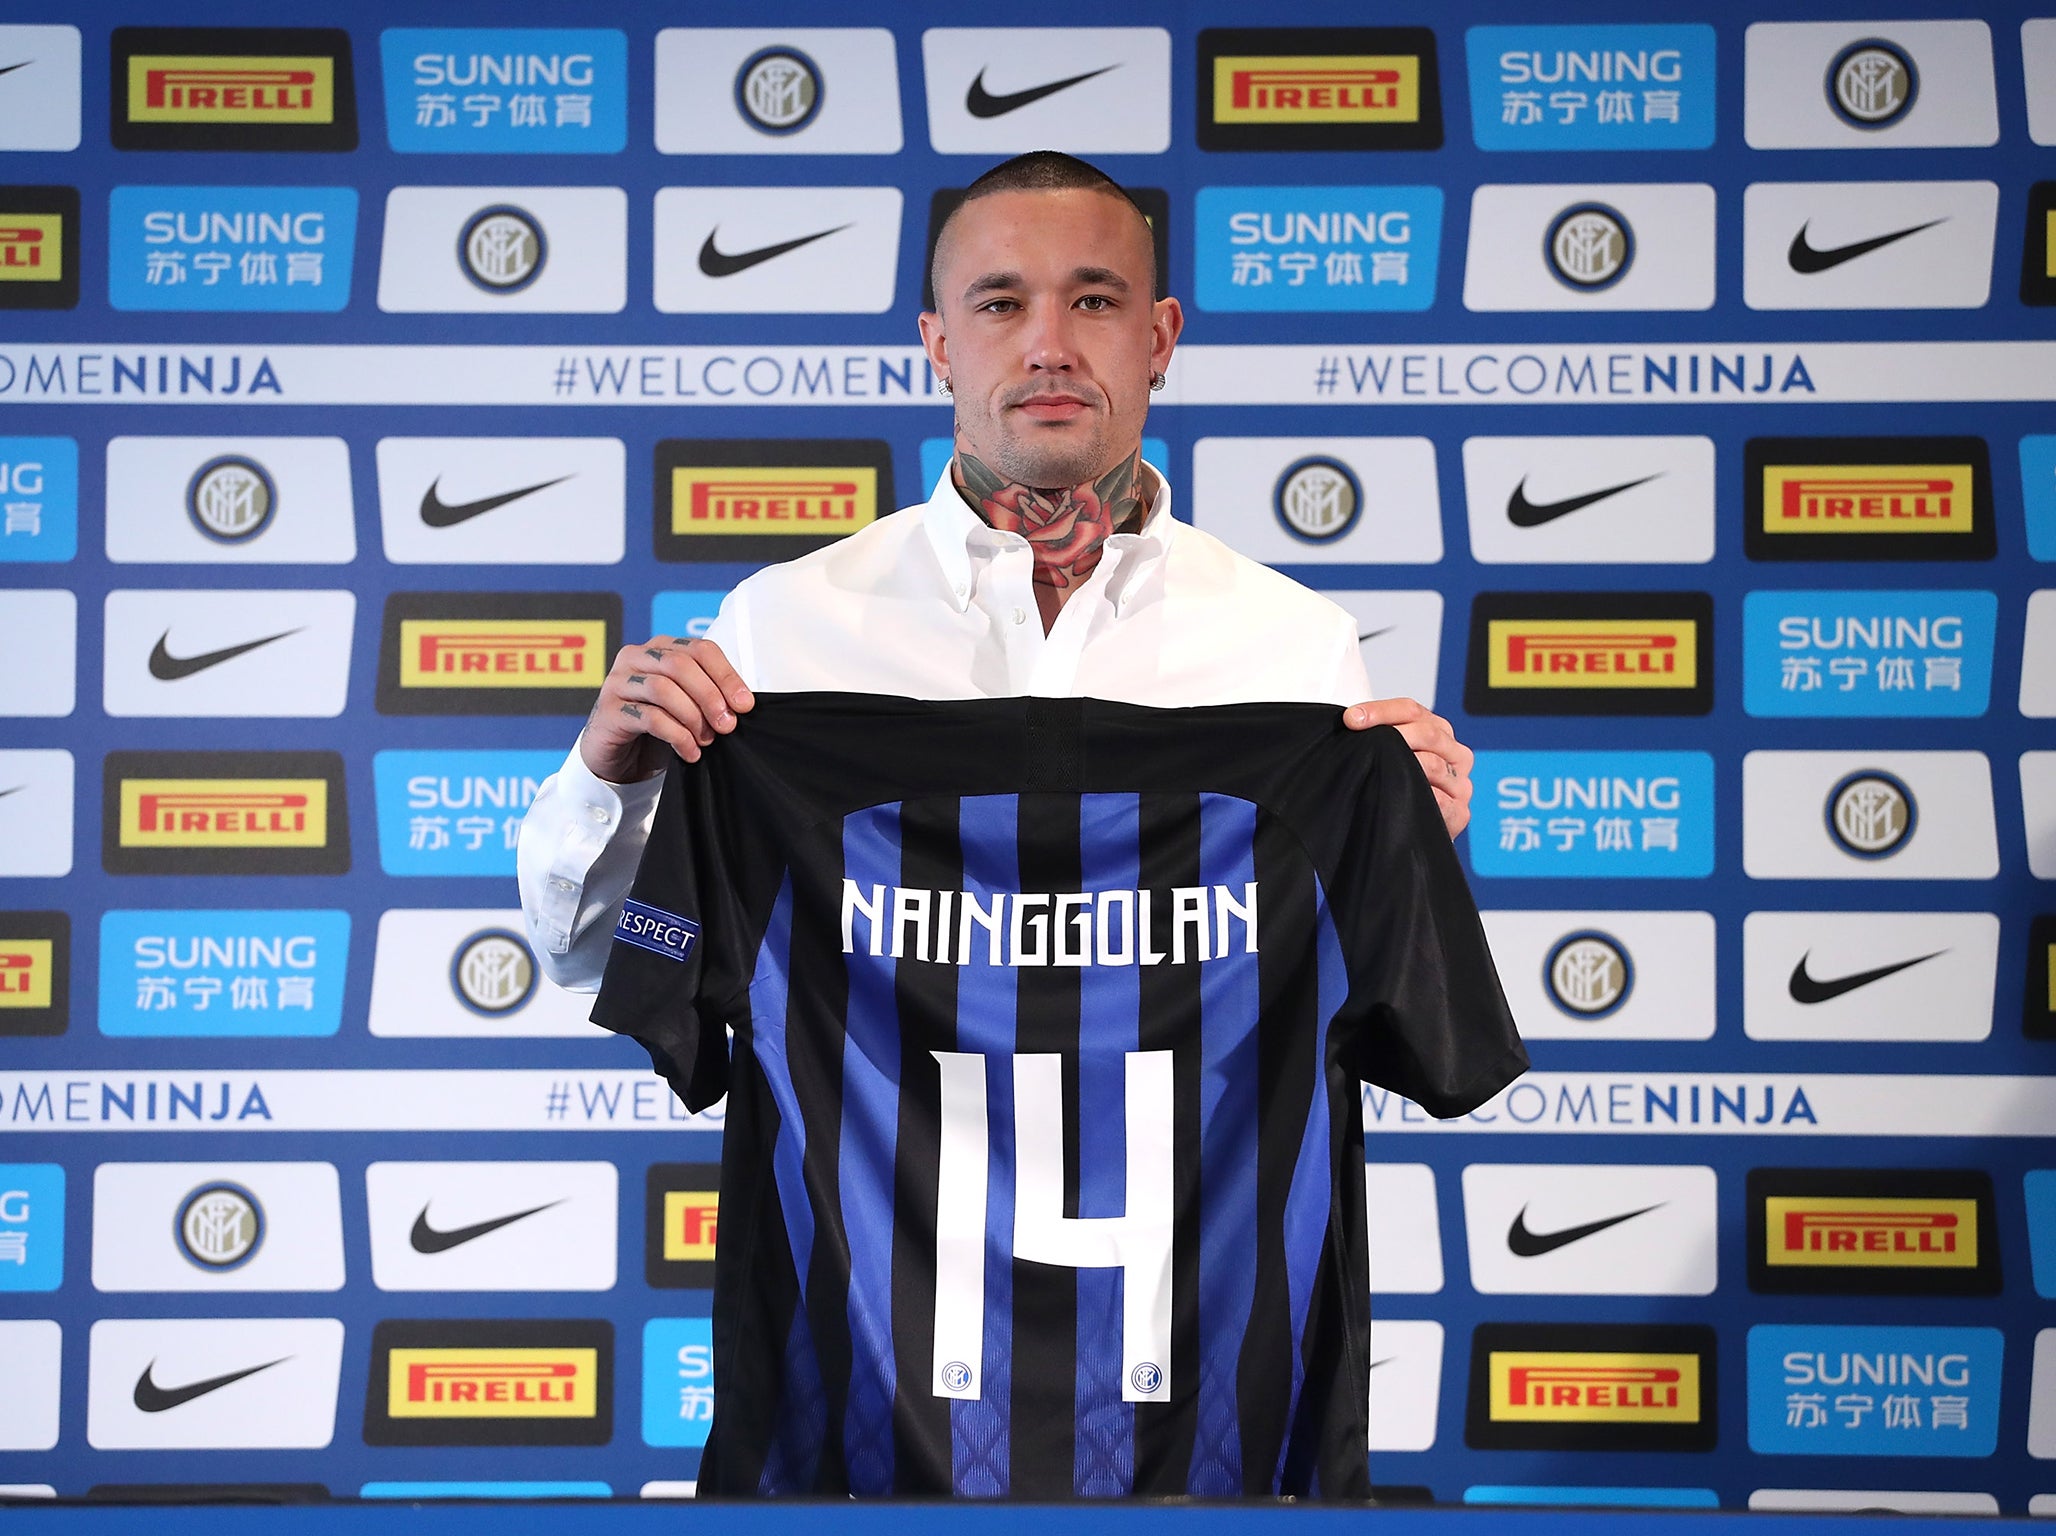 Nainggolan was a Premier League target for years before leaving Roma for Inter